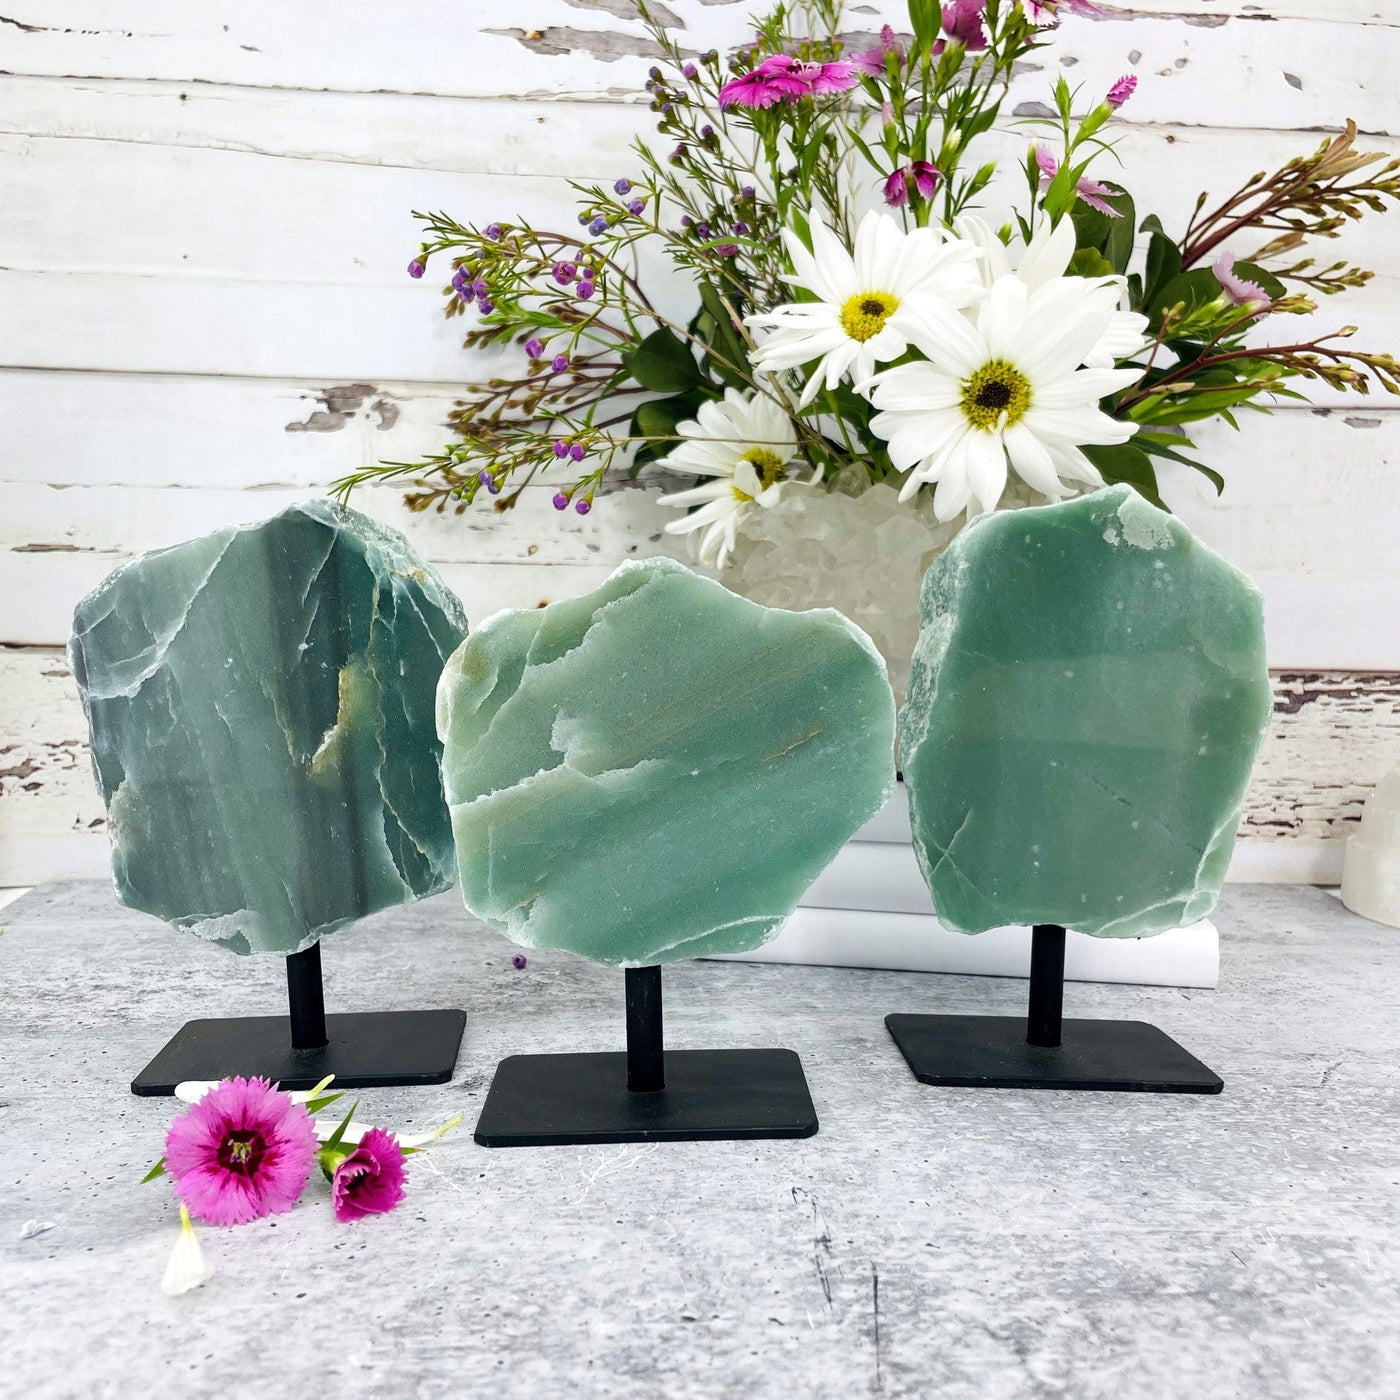 3 polished green quartz on metal stands with flowers in the background